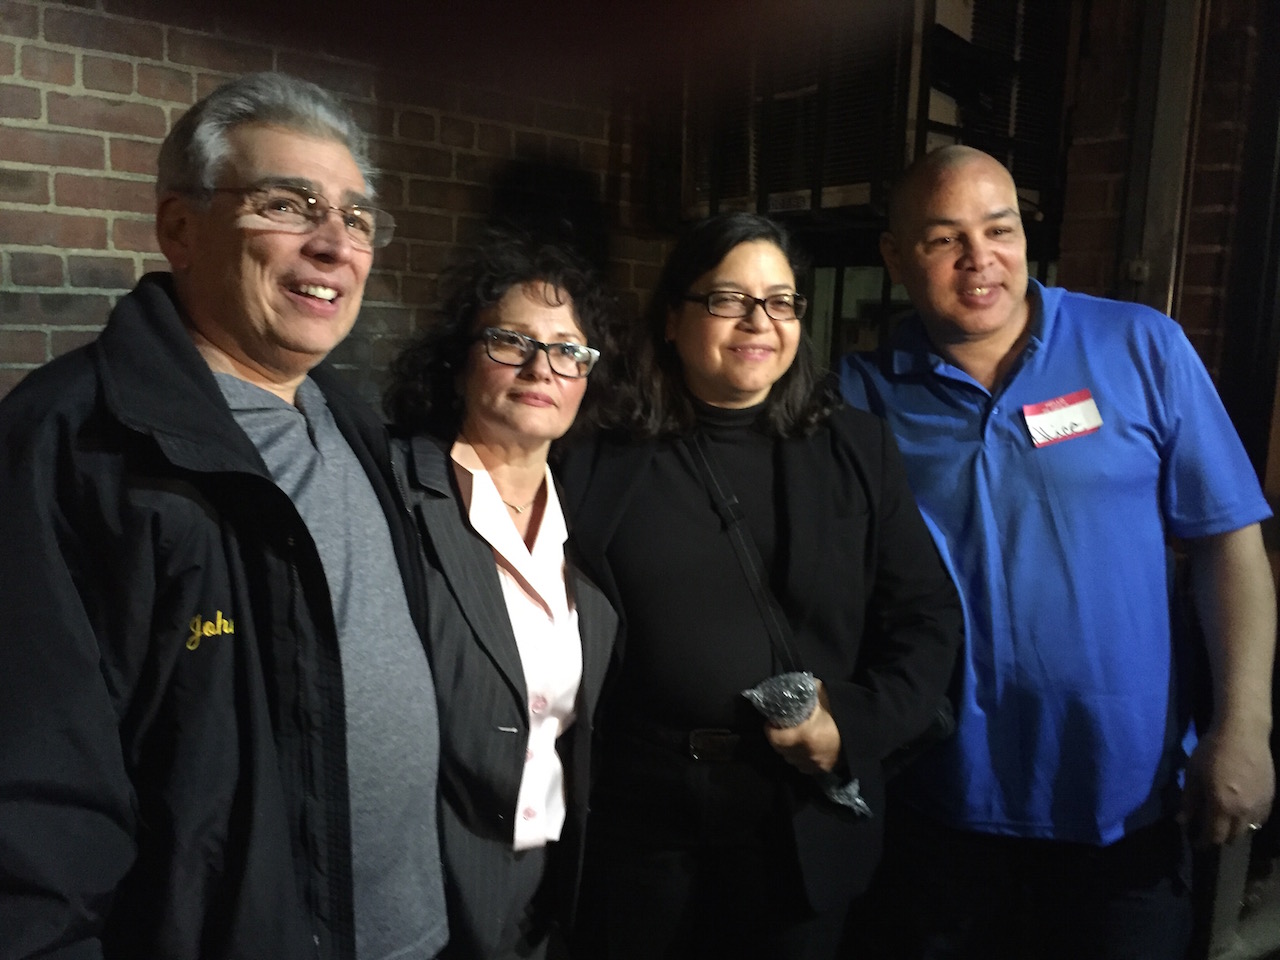 Winning candidate Alice Cancel, second from left, with, from left, supporters former District Leader John Fratta, Councilmember Rosie Mendez and District Leader Pedro Carti.